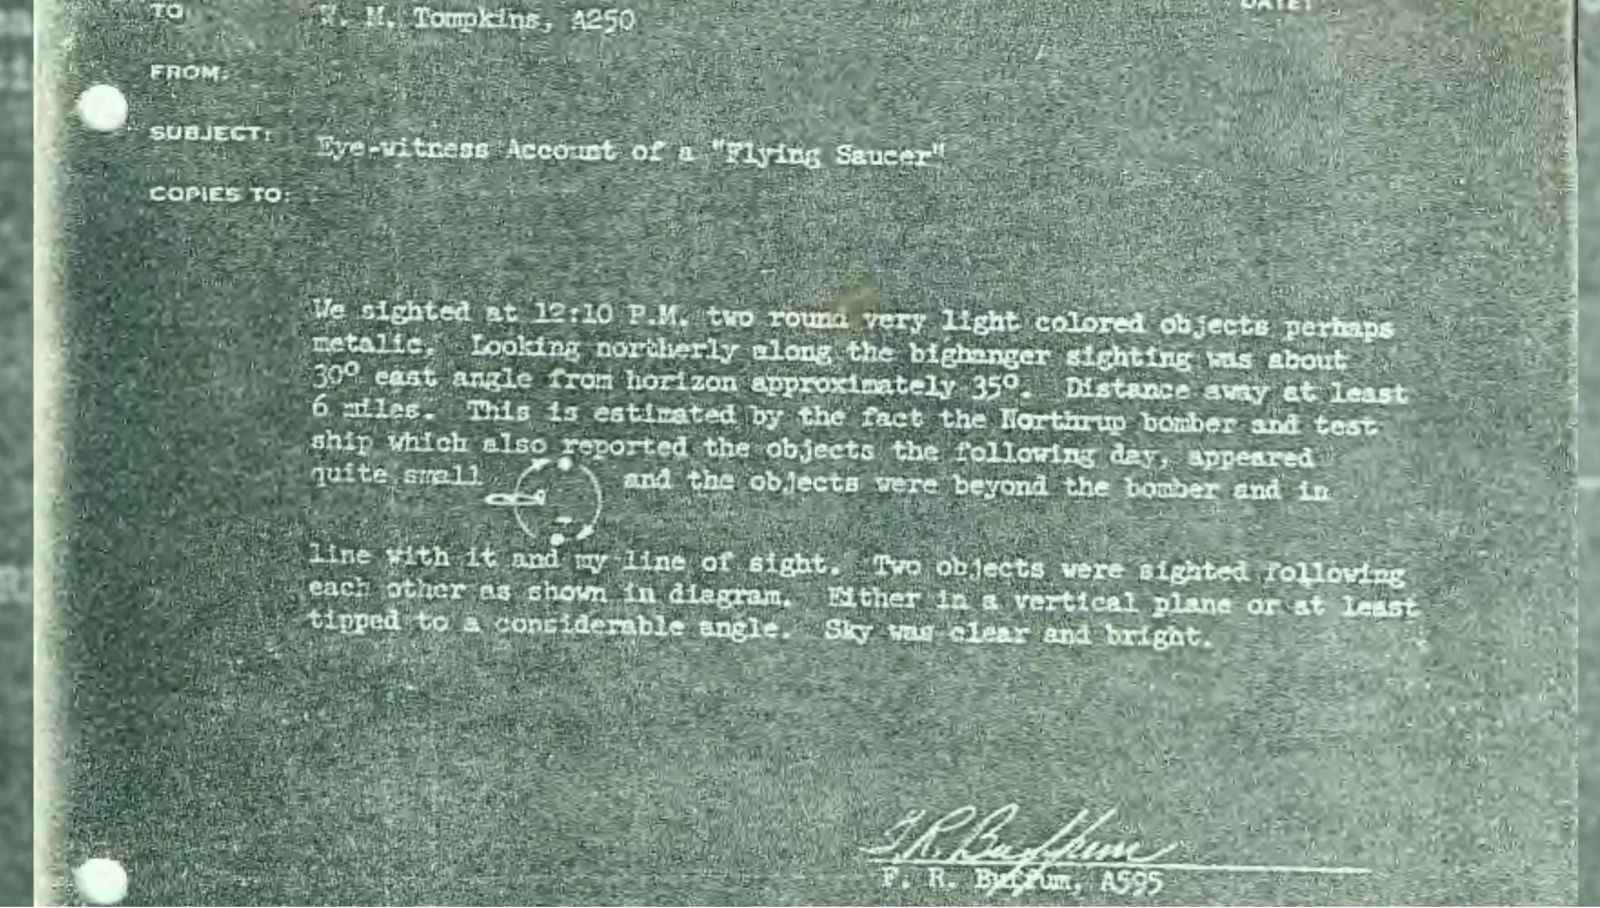 16_memo_eye_witness_account_of_a_flying_saucer